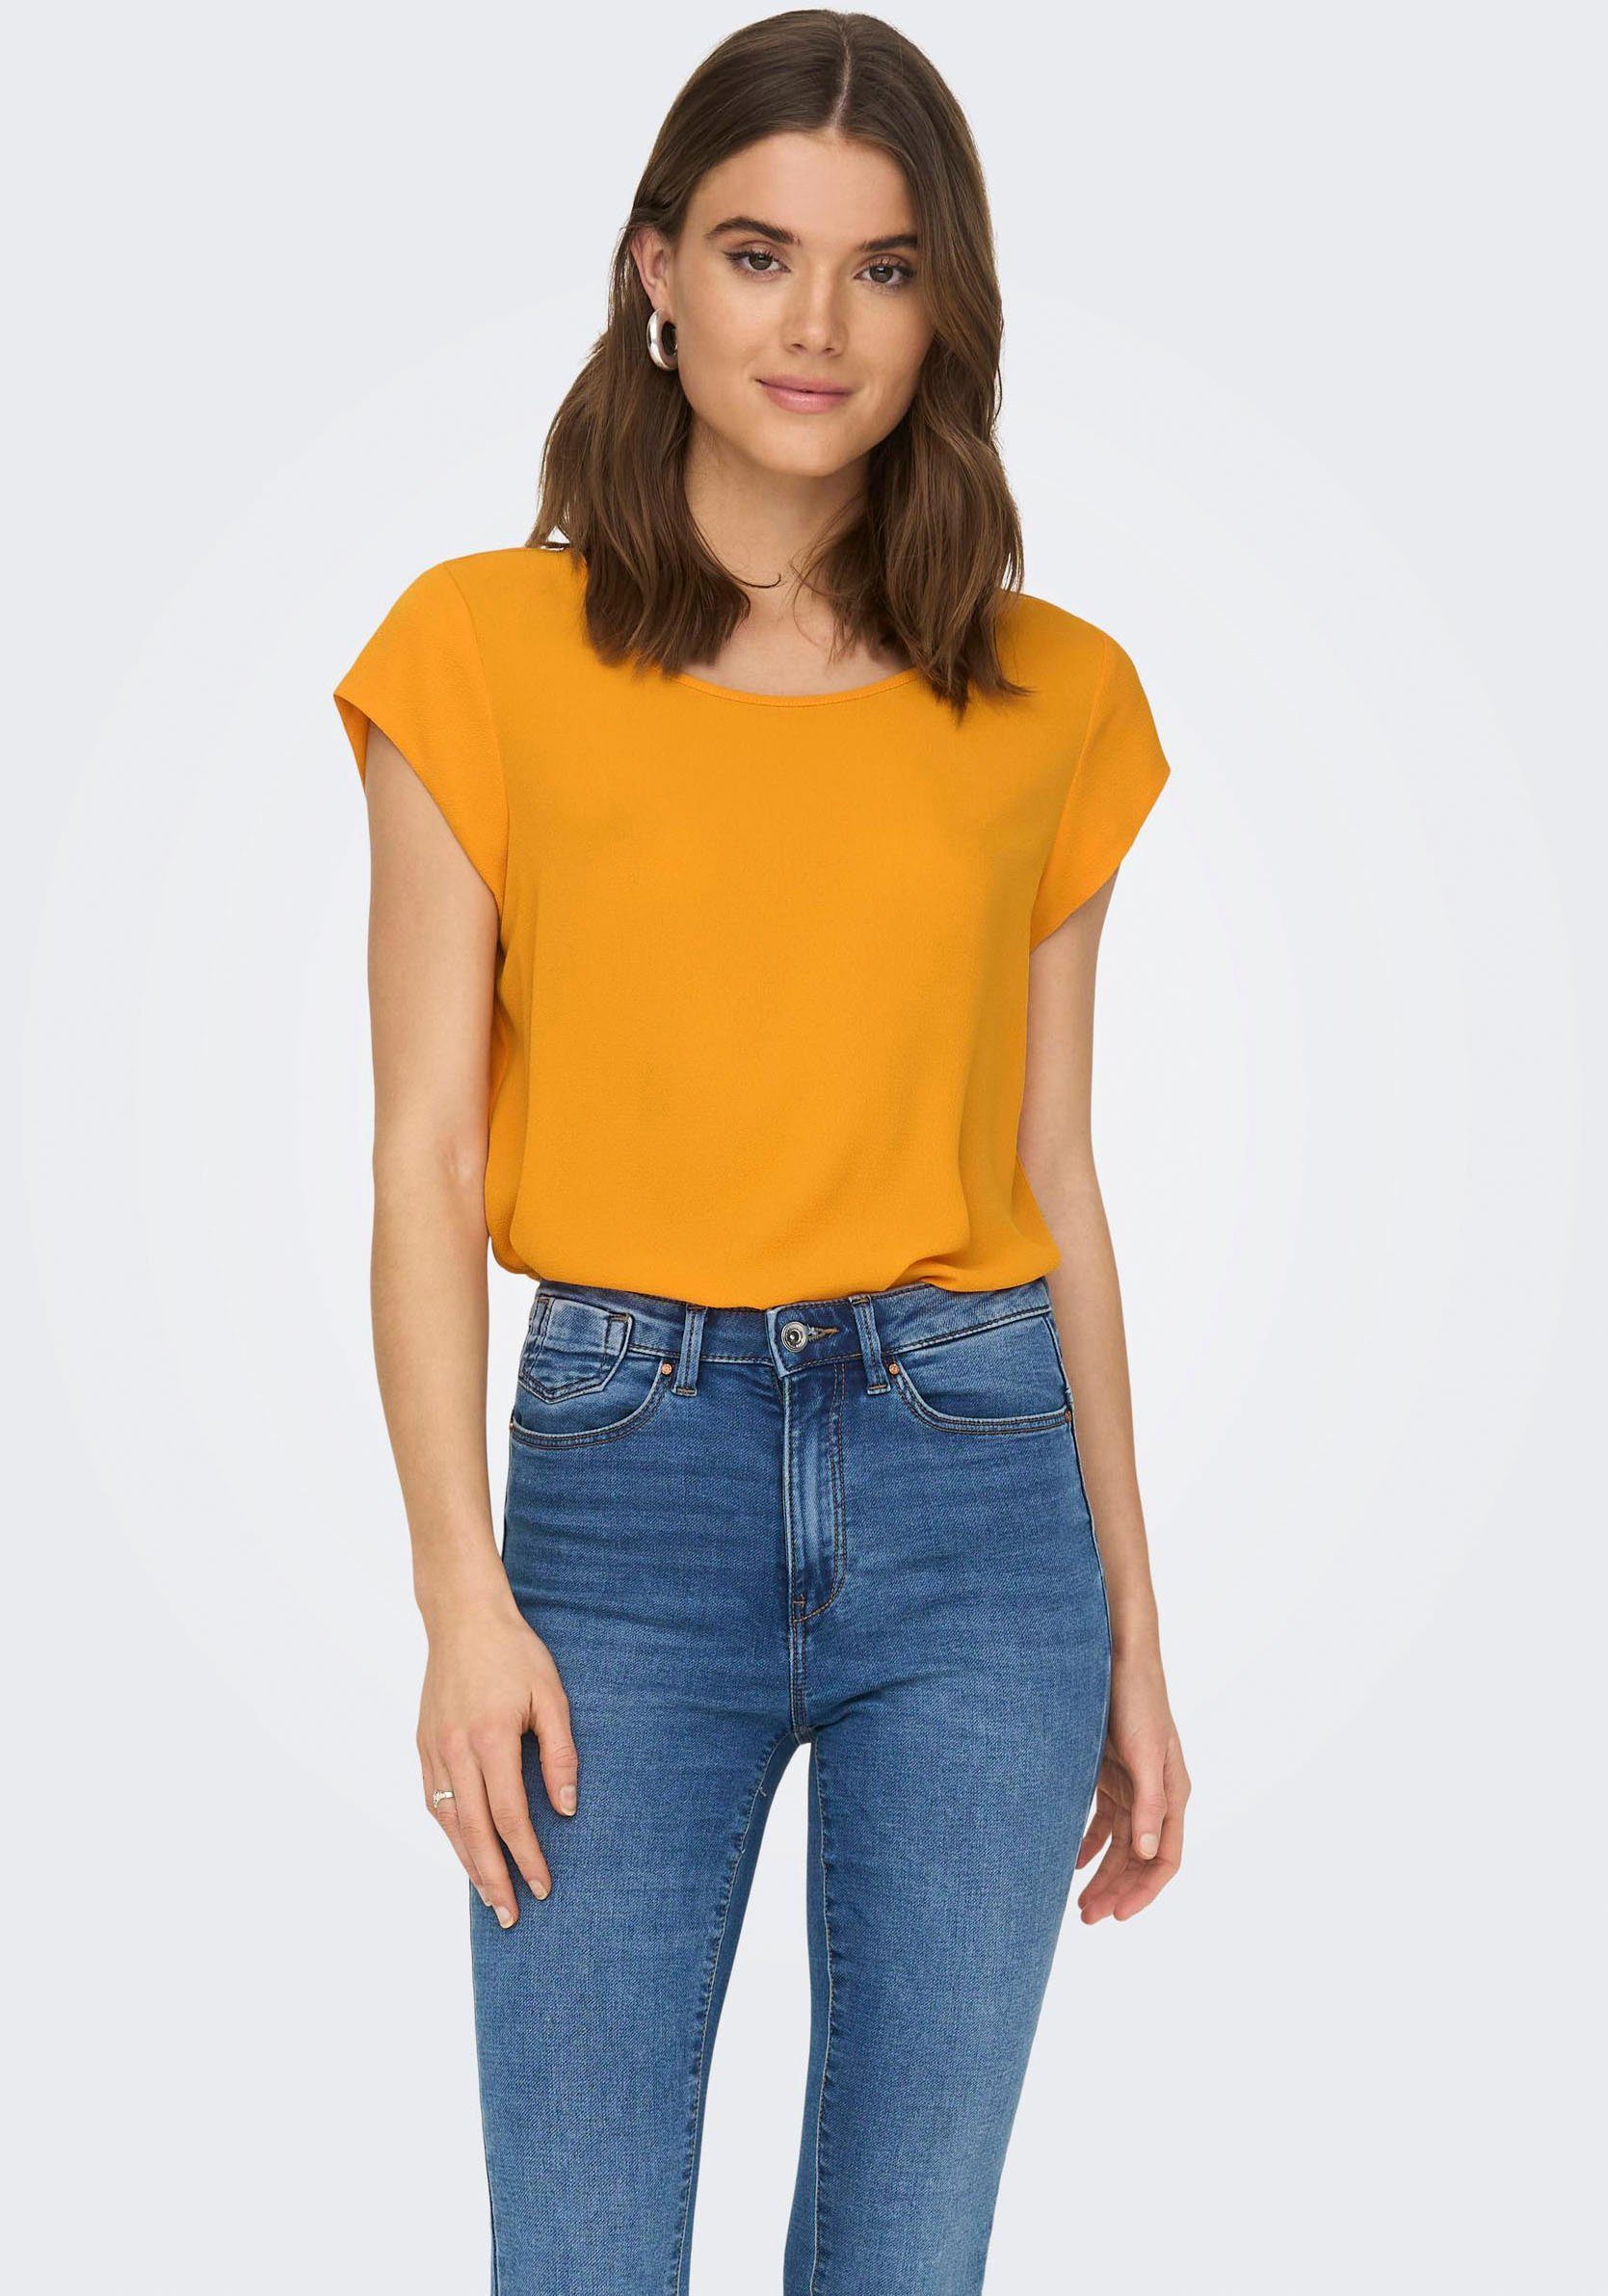 S/S TOP SOLID Apricot ONLVIC ONLY PTM Kurzarmbluse NOOS